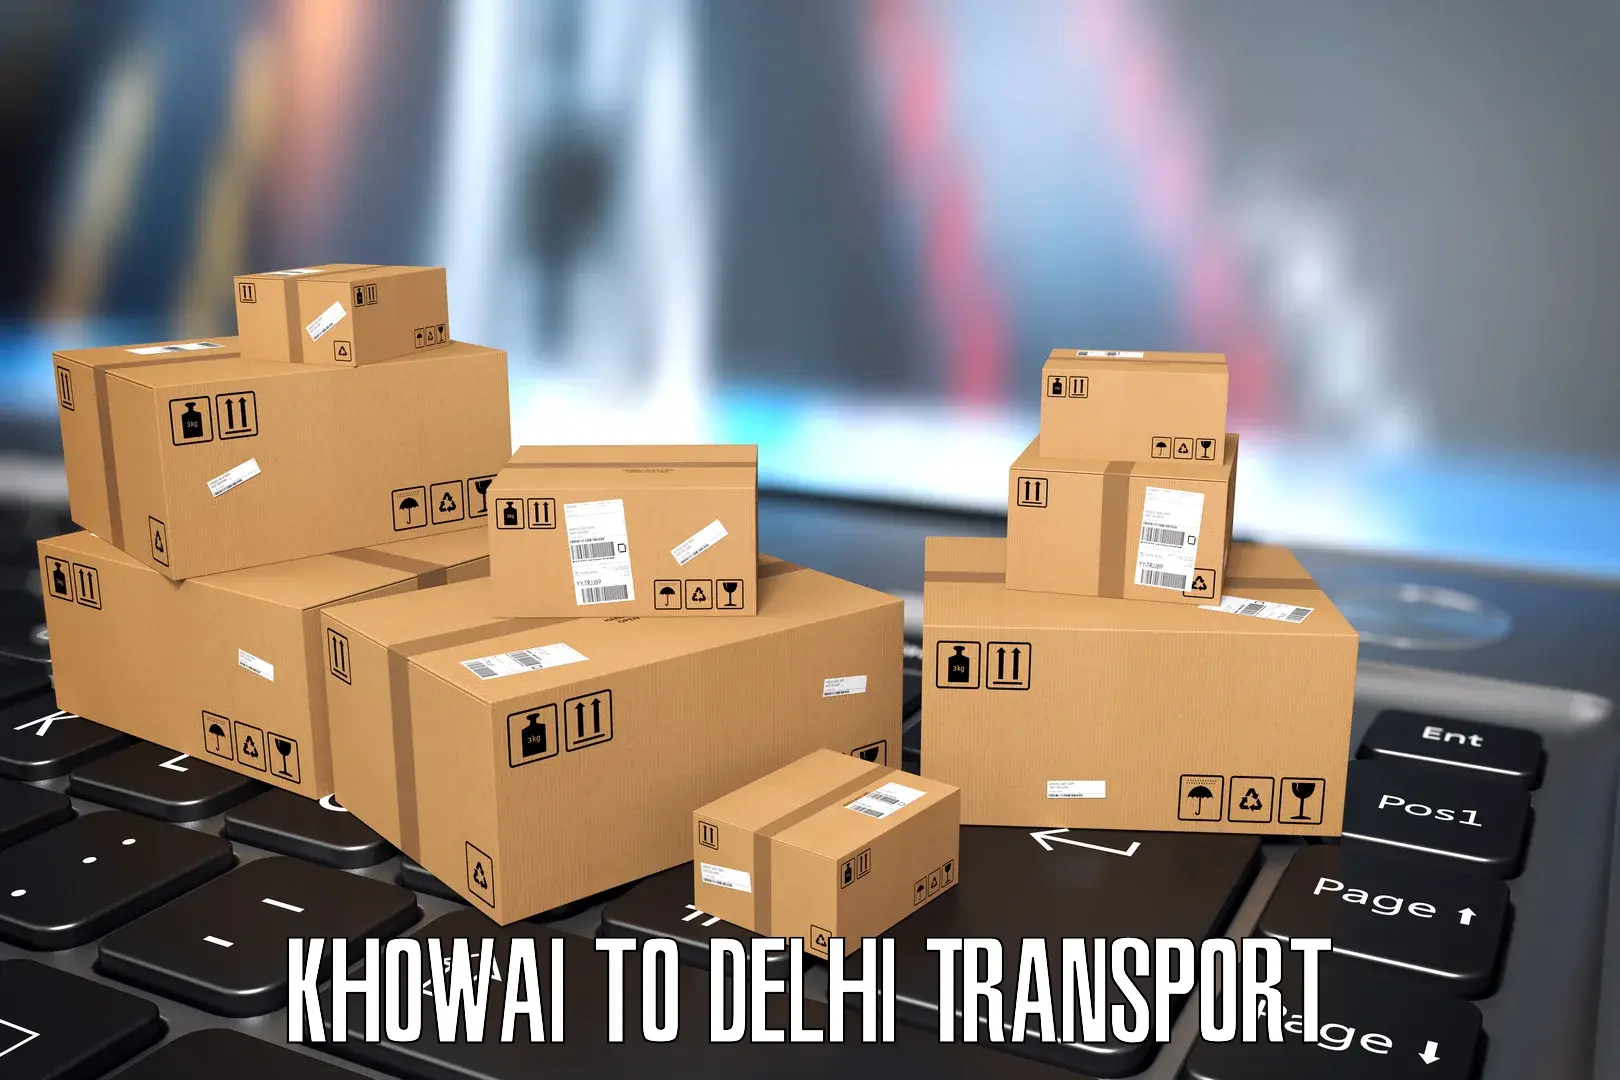 Truck transport companies in India Khowai to NCR